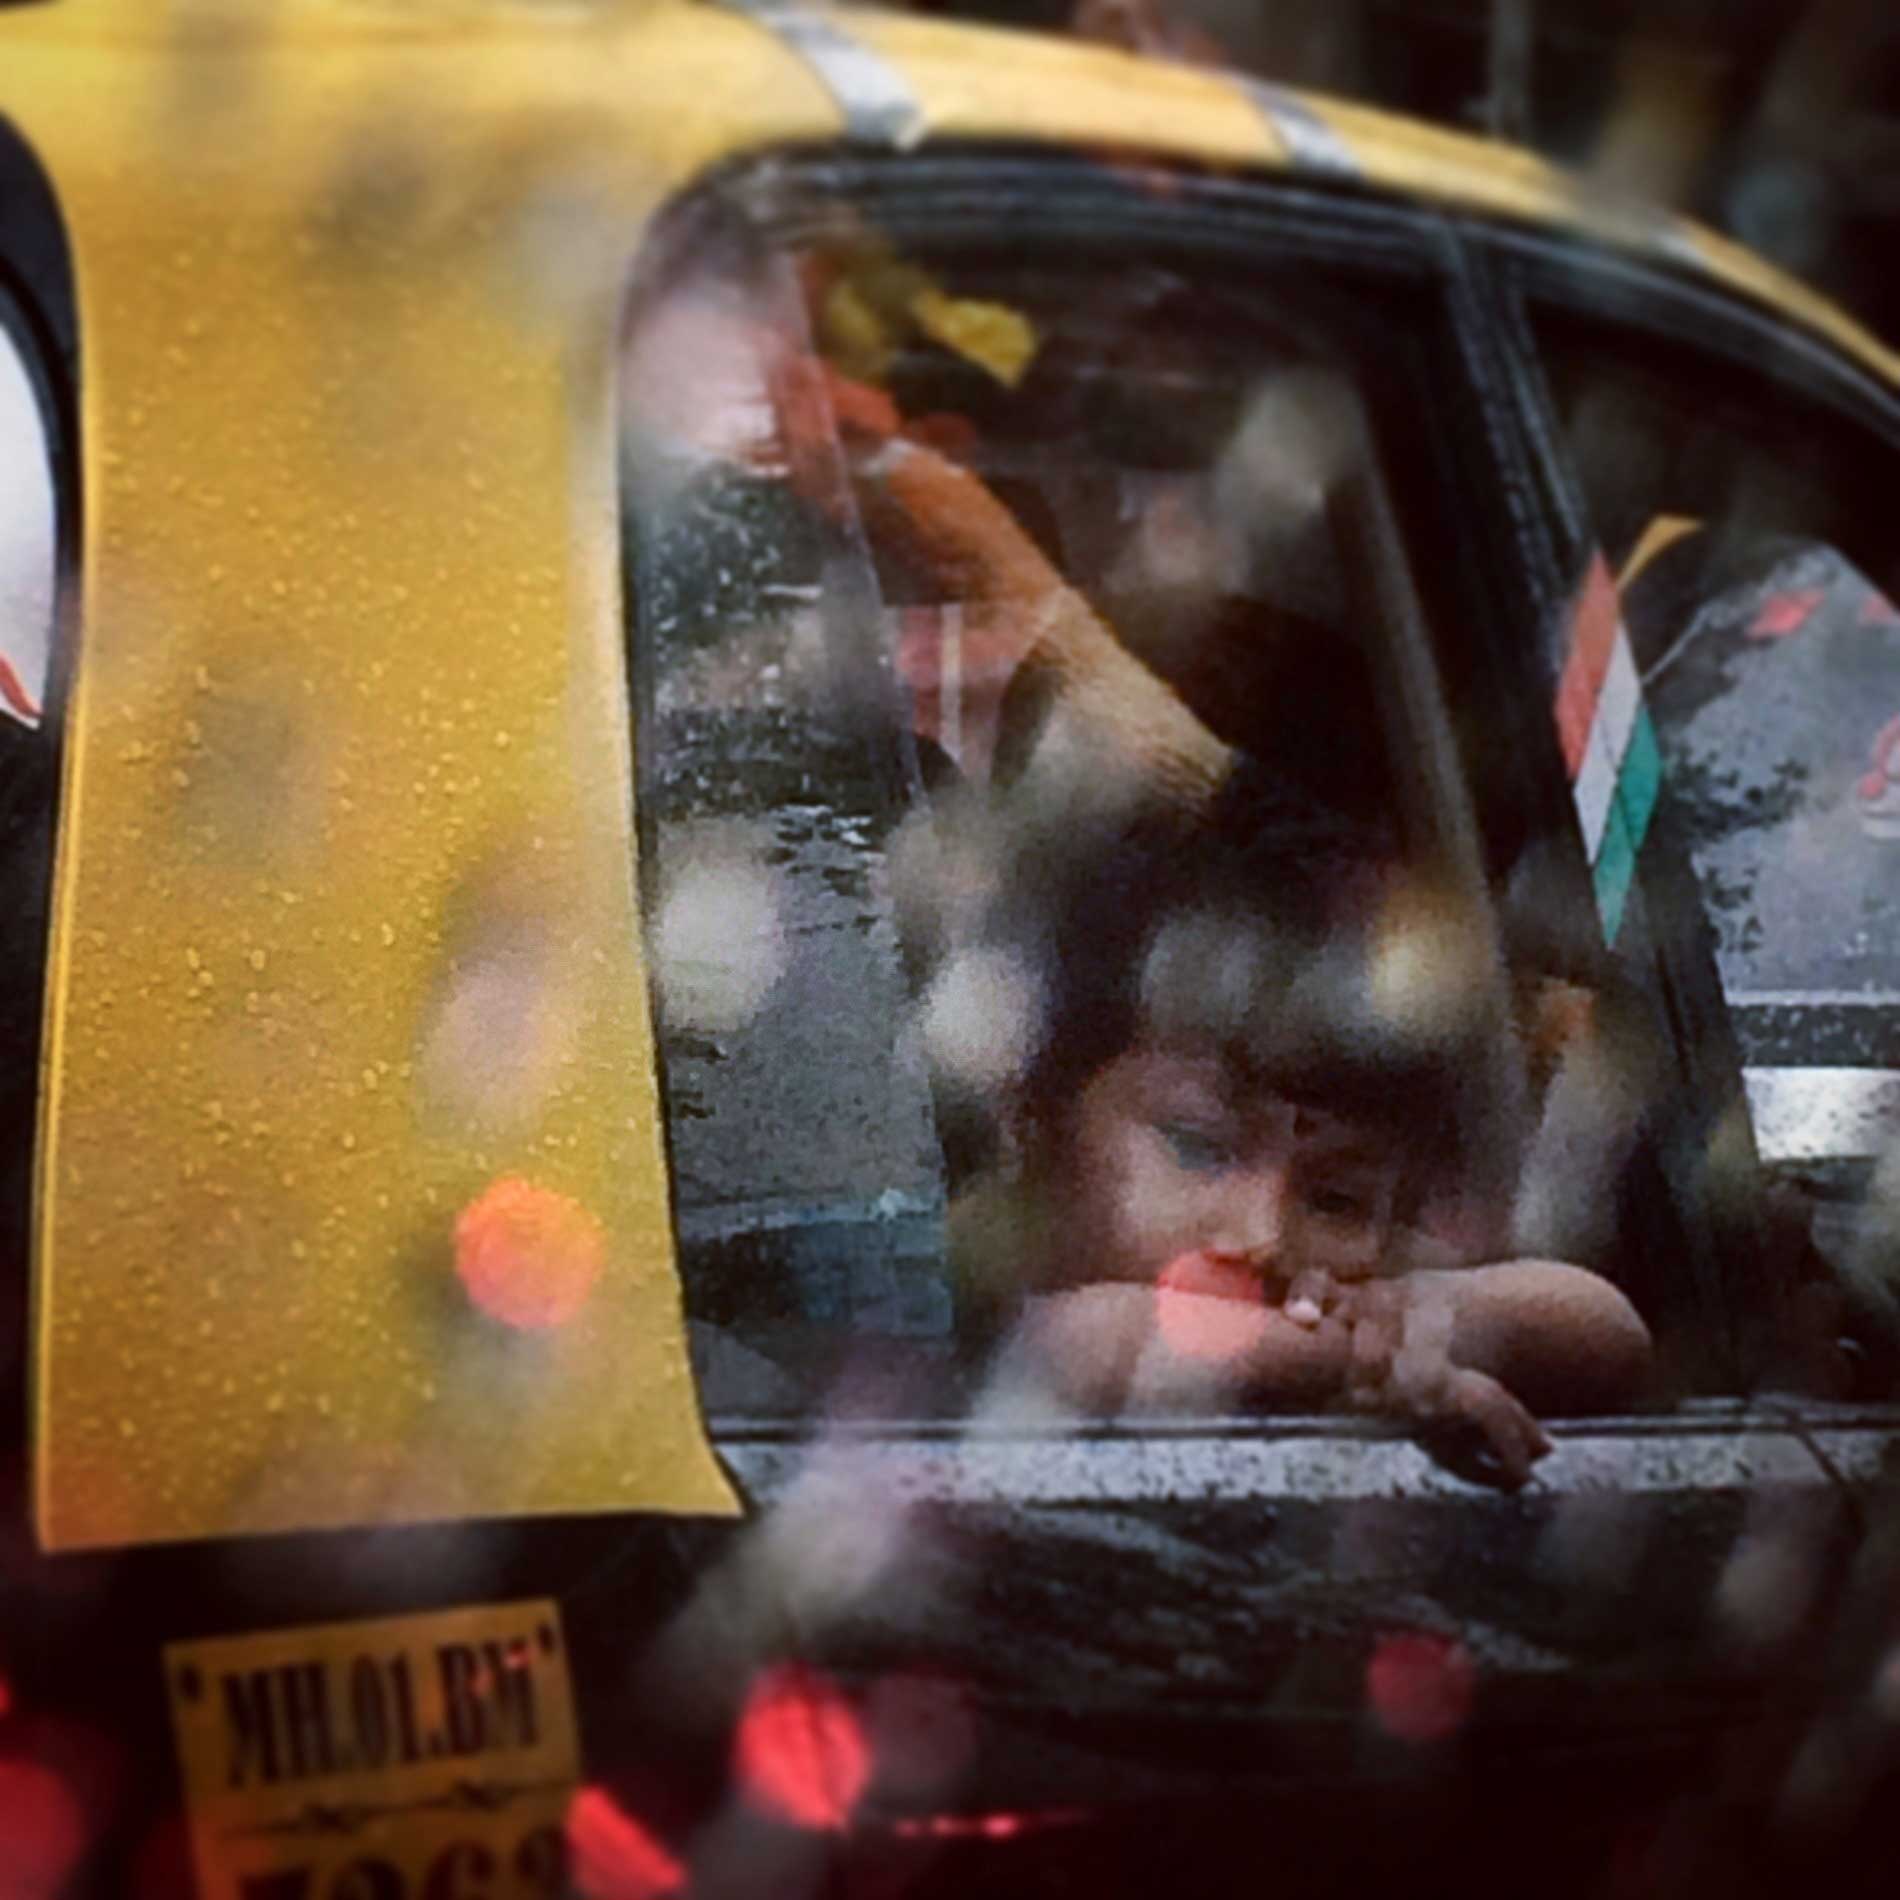 A girl looks out of a taxi window in Mumbai, India in August of 2014 during one of the seasonal monsoons. Photo by Asmita Parelkar (@asmitaparelkar)